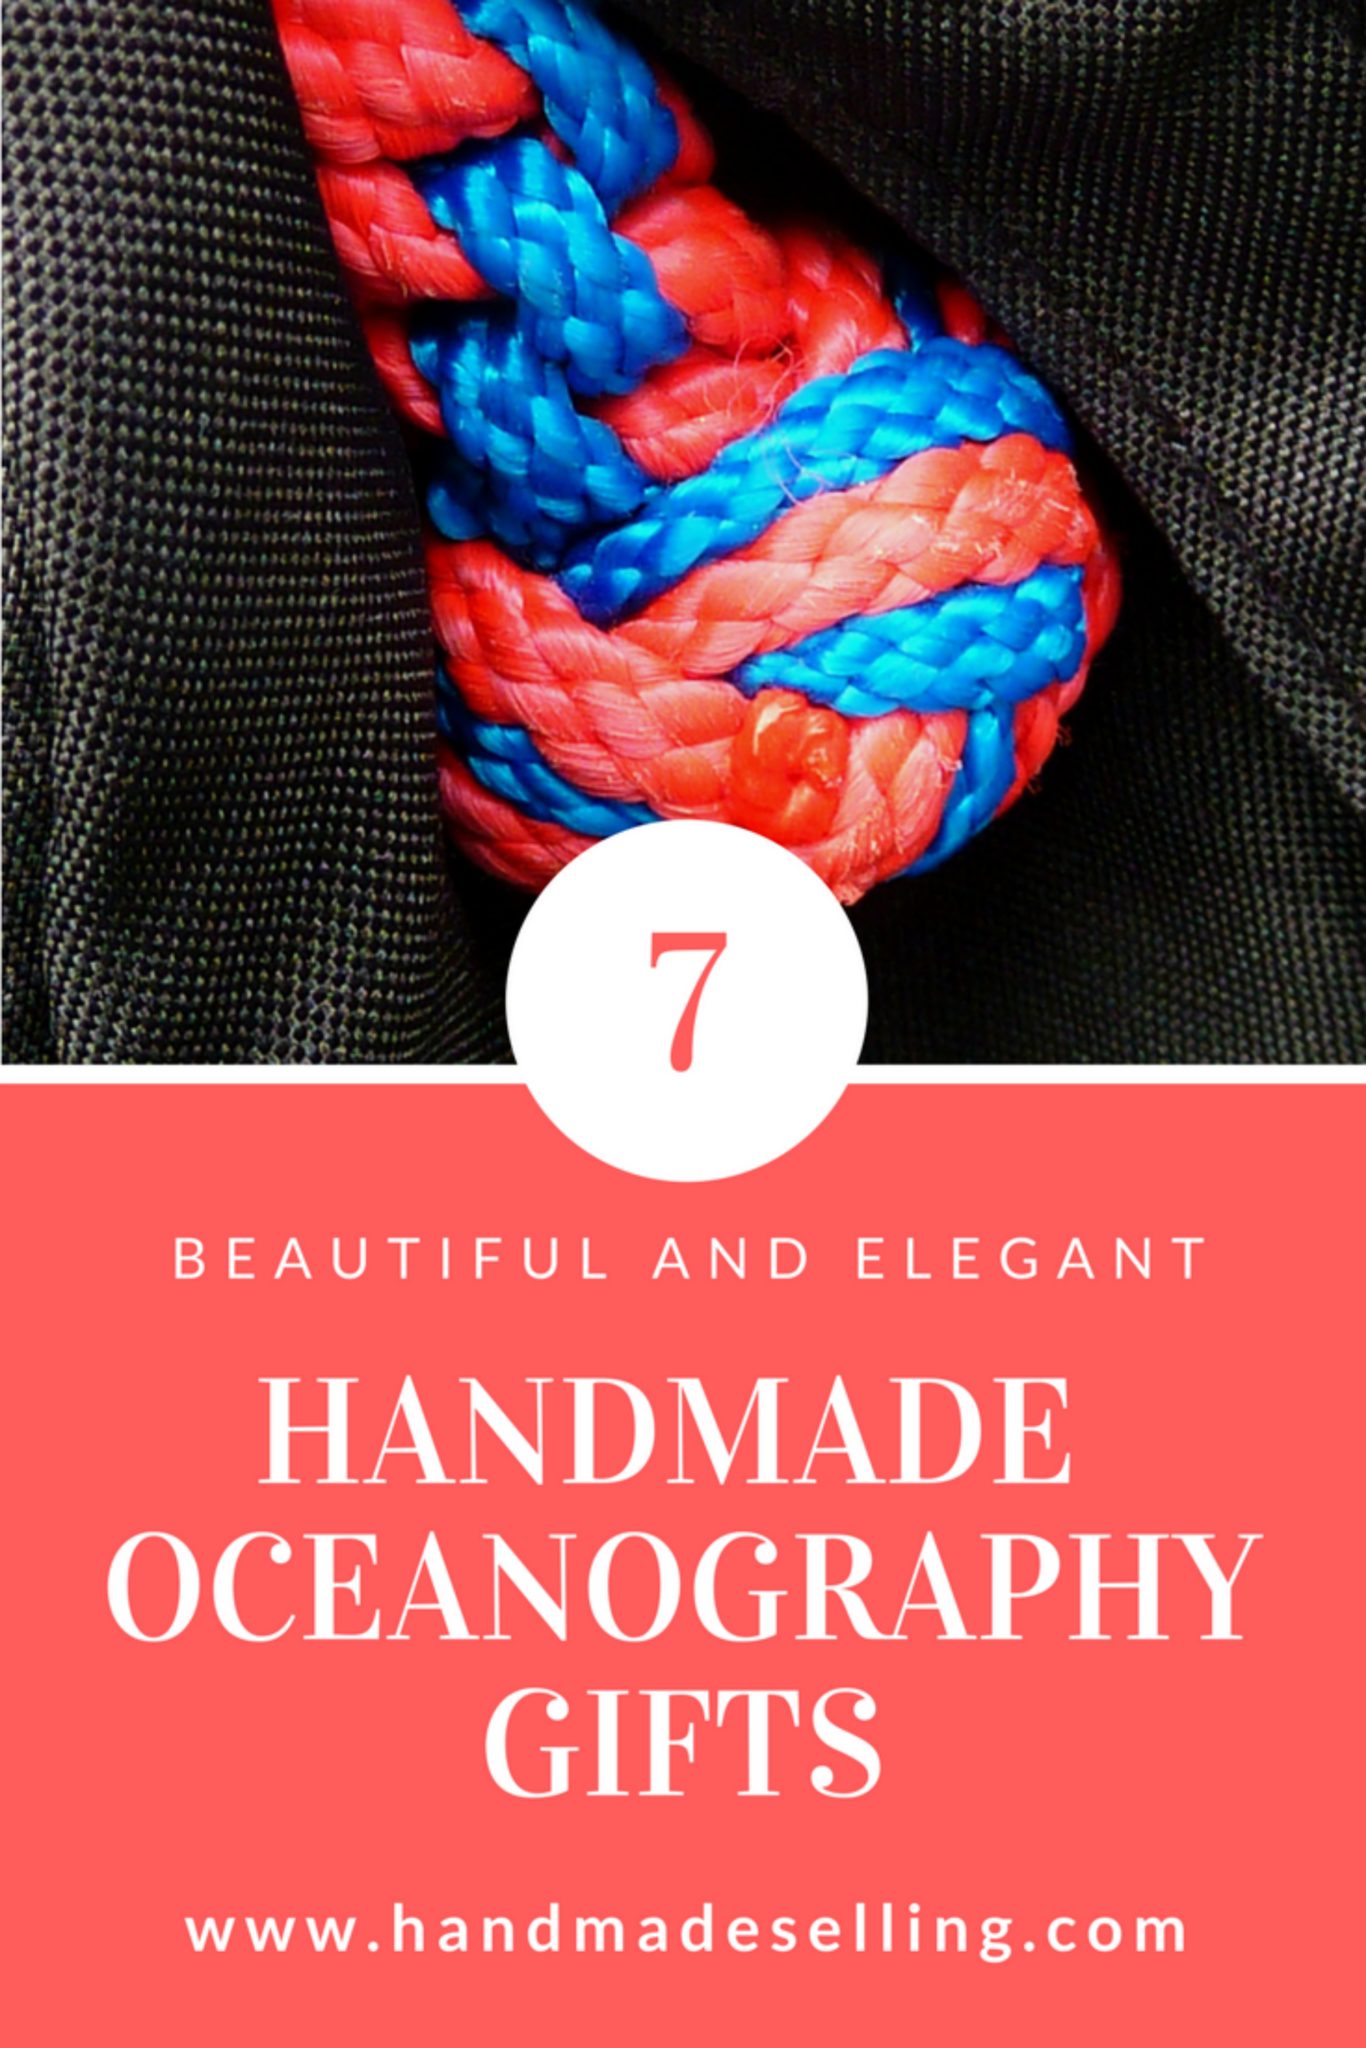 Oceanography gifts for sea lovers